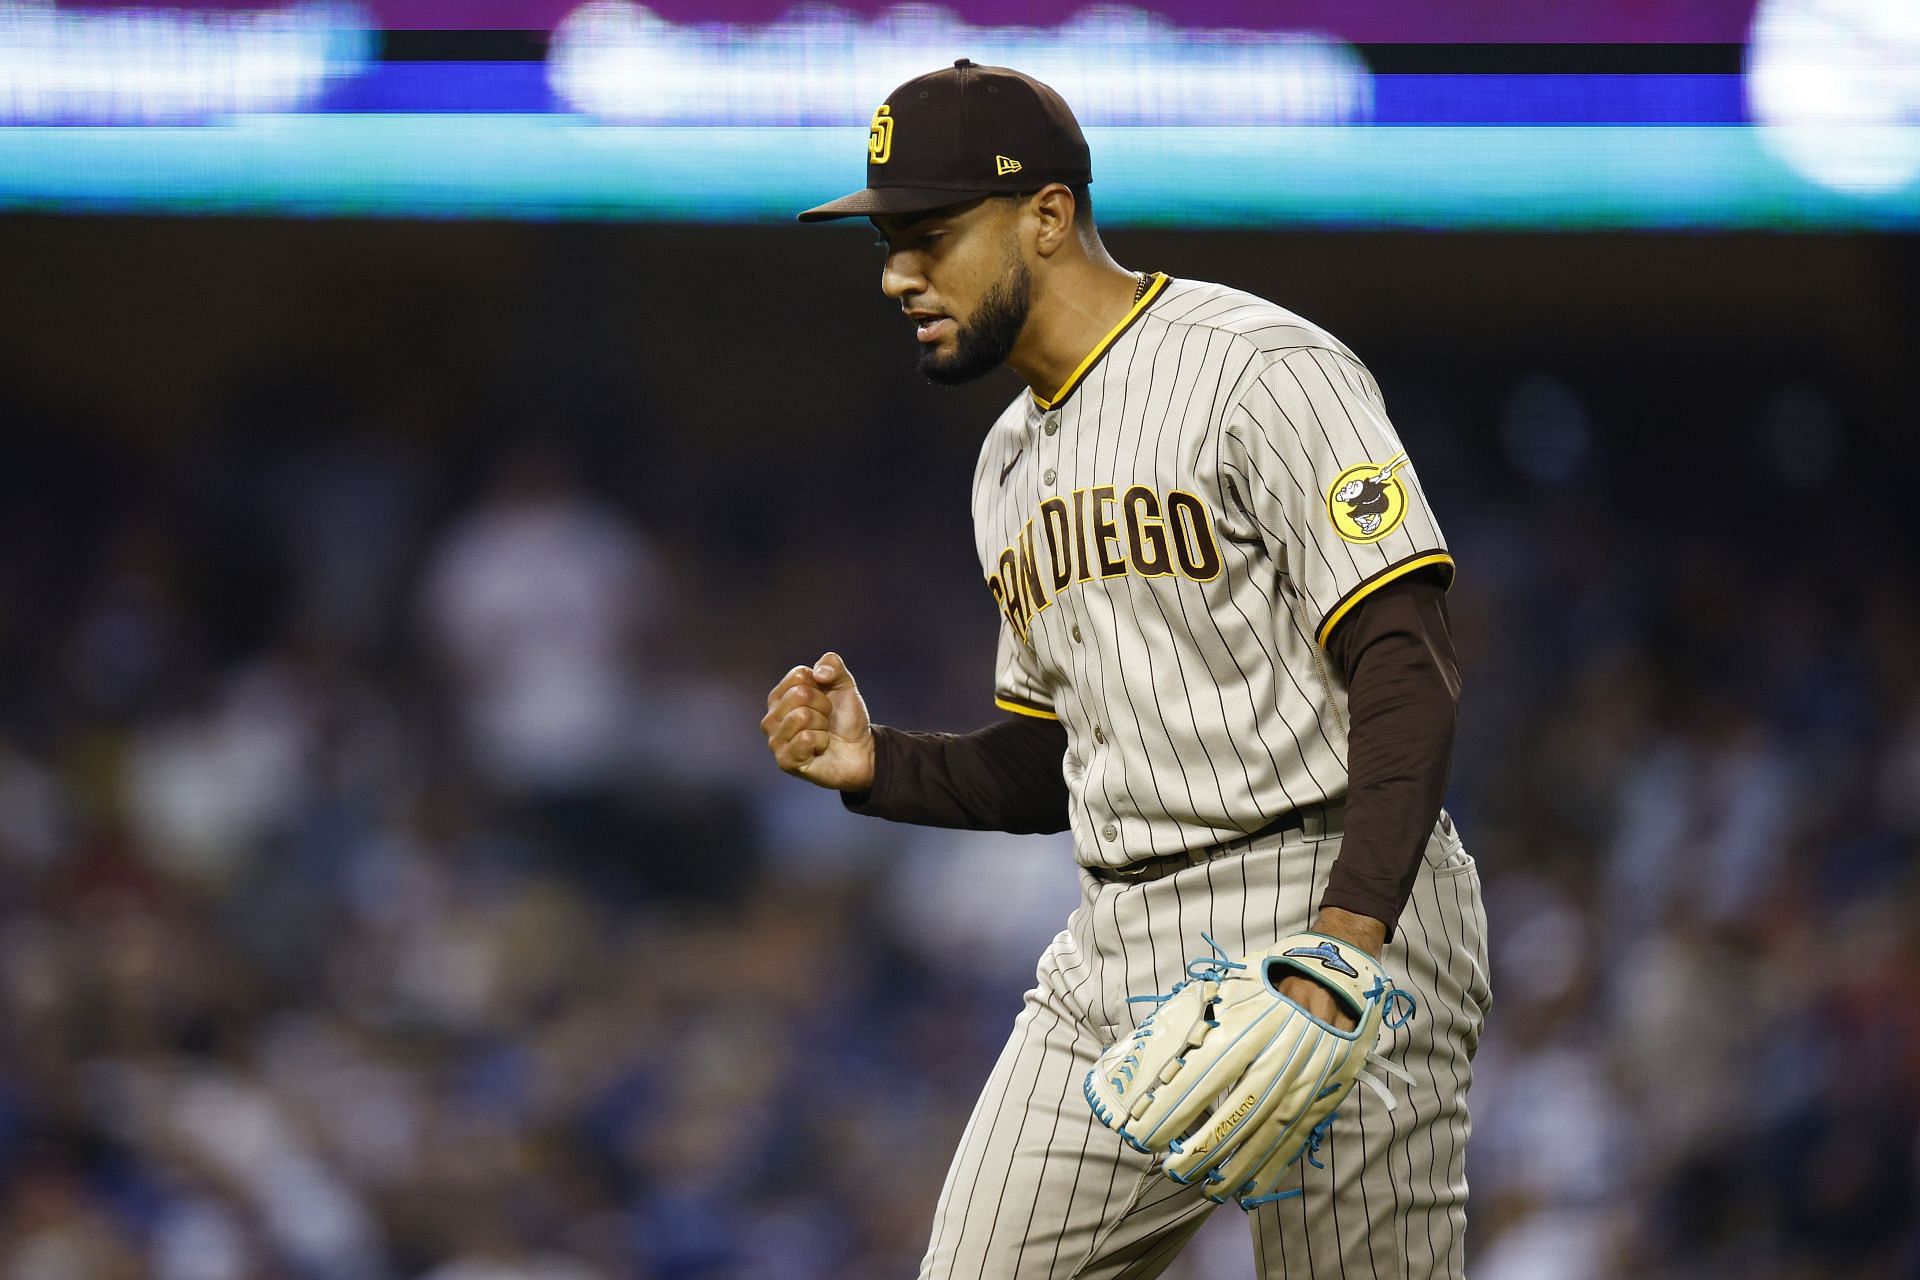 San Diego Padres fans fired up over relief pitcher Robert Suarez agreeing  to a high-priced long-term deal with the team